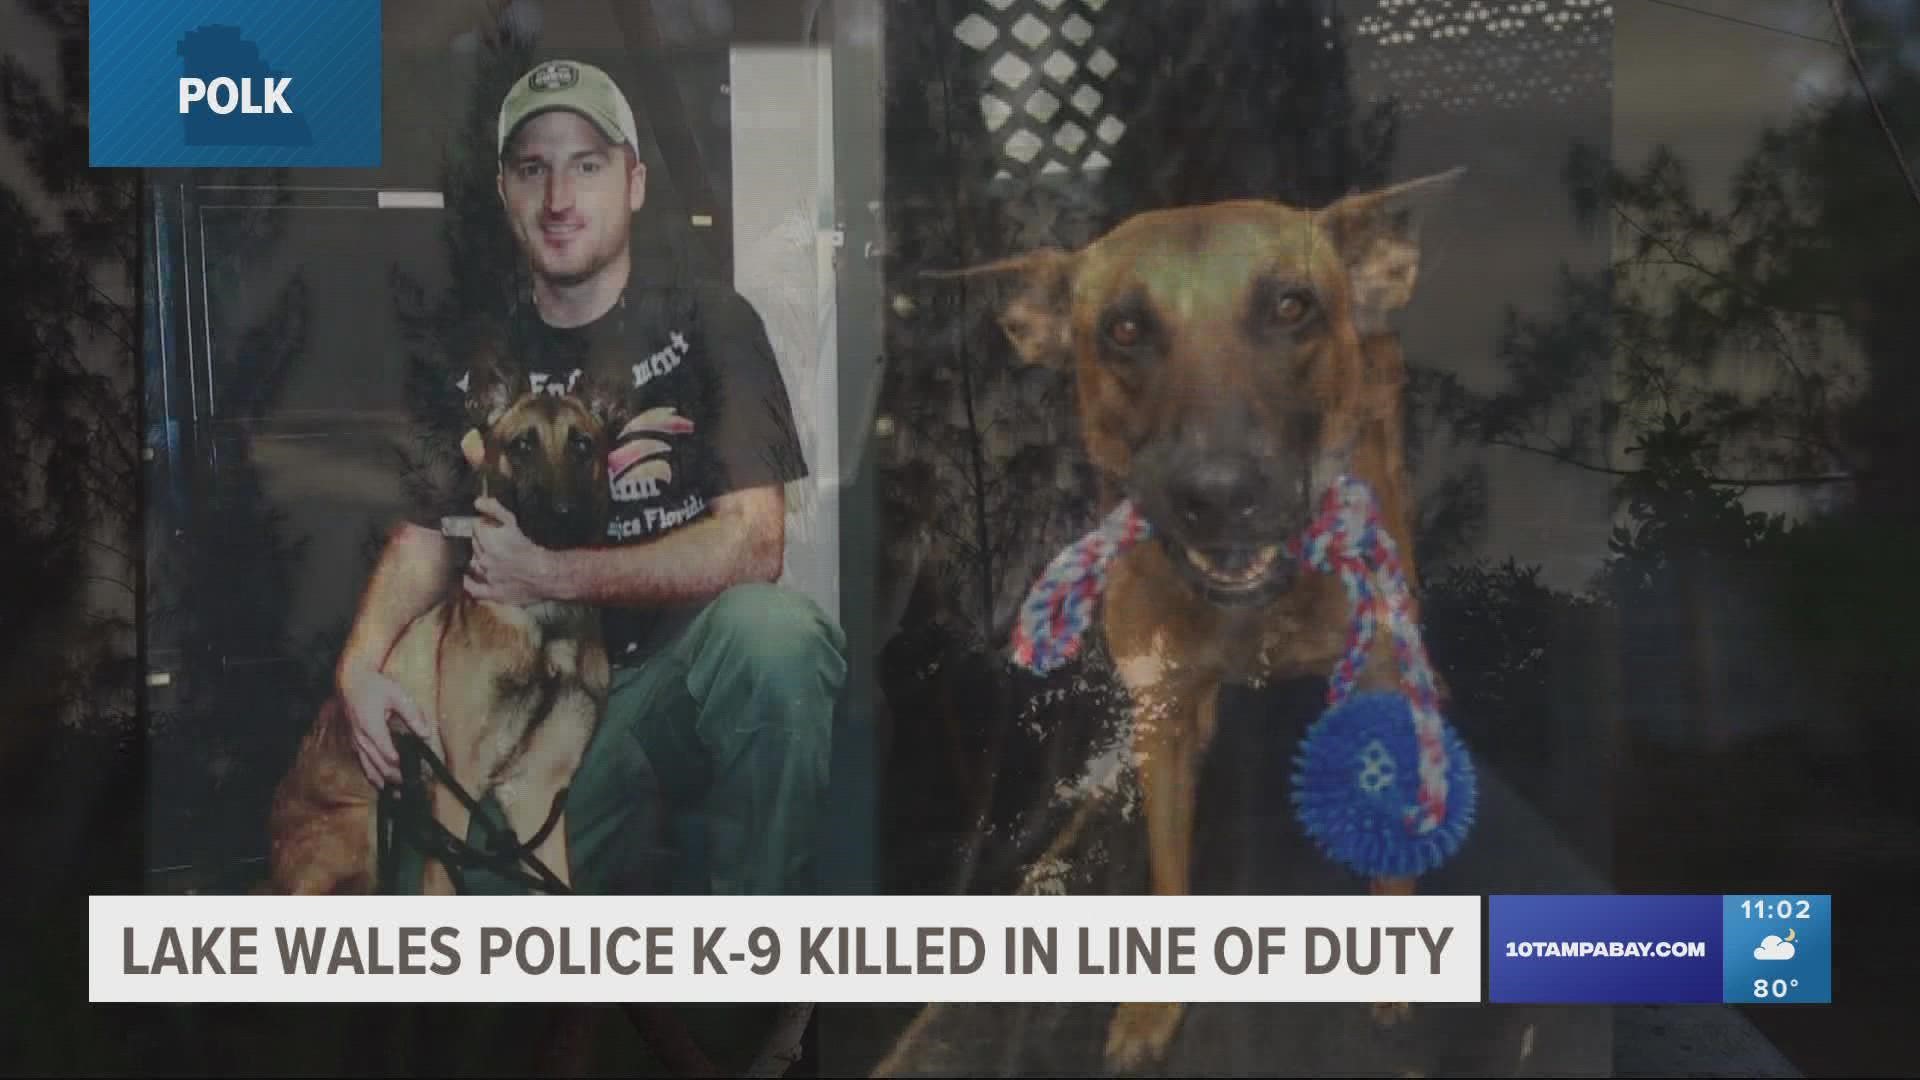 The K9 was killed while apprehending a suspect, police say.